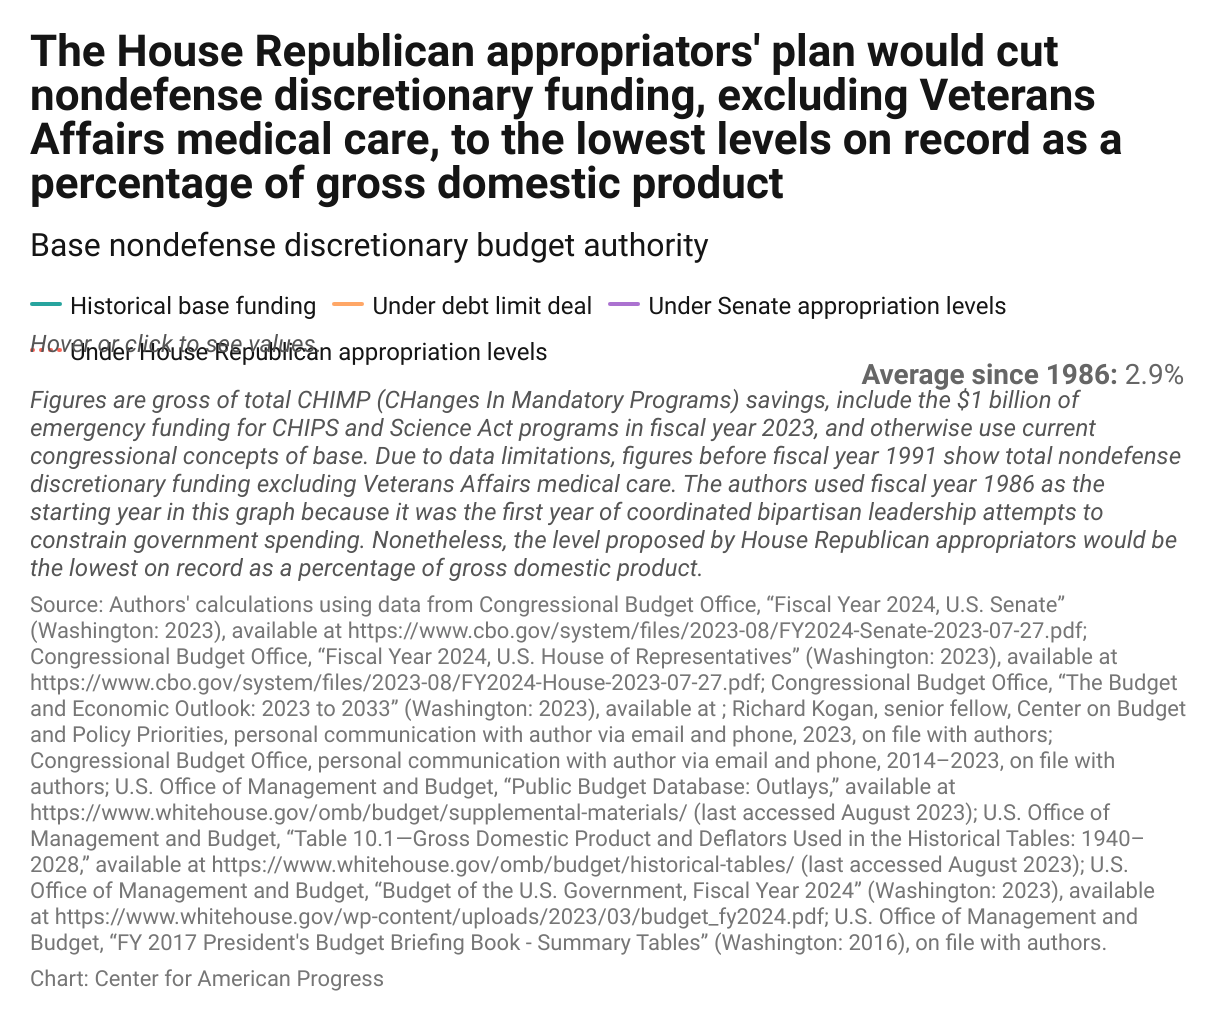 Graph comparing historical nondefense discretionary programs, excluding Veterans Affairs medical care, to the debt limit deal, to the Senate appropriators' plan, and to the House Republican appropriators' plan.